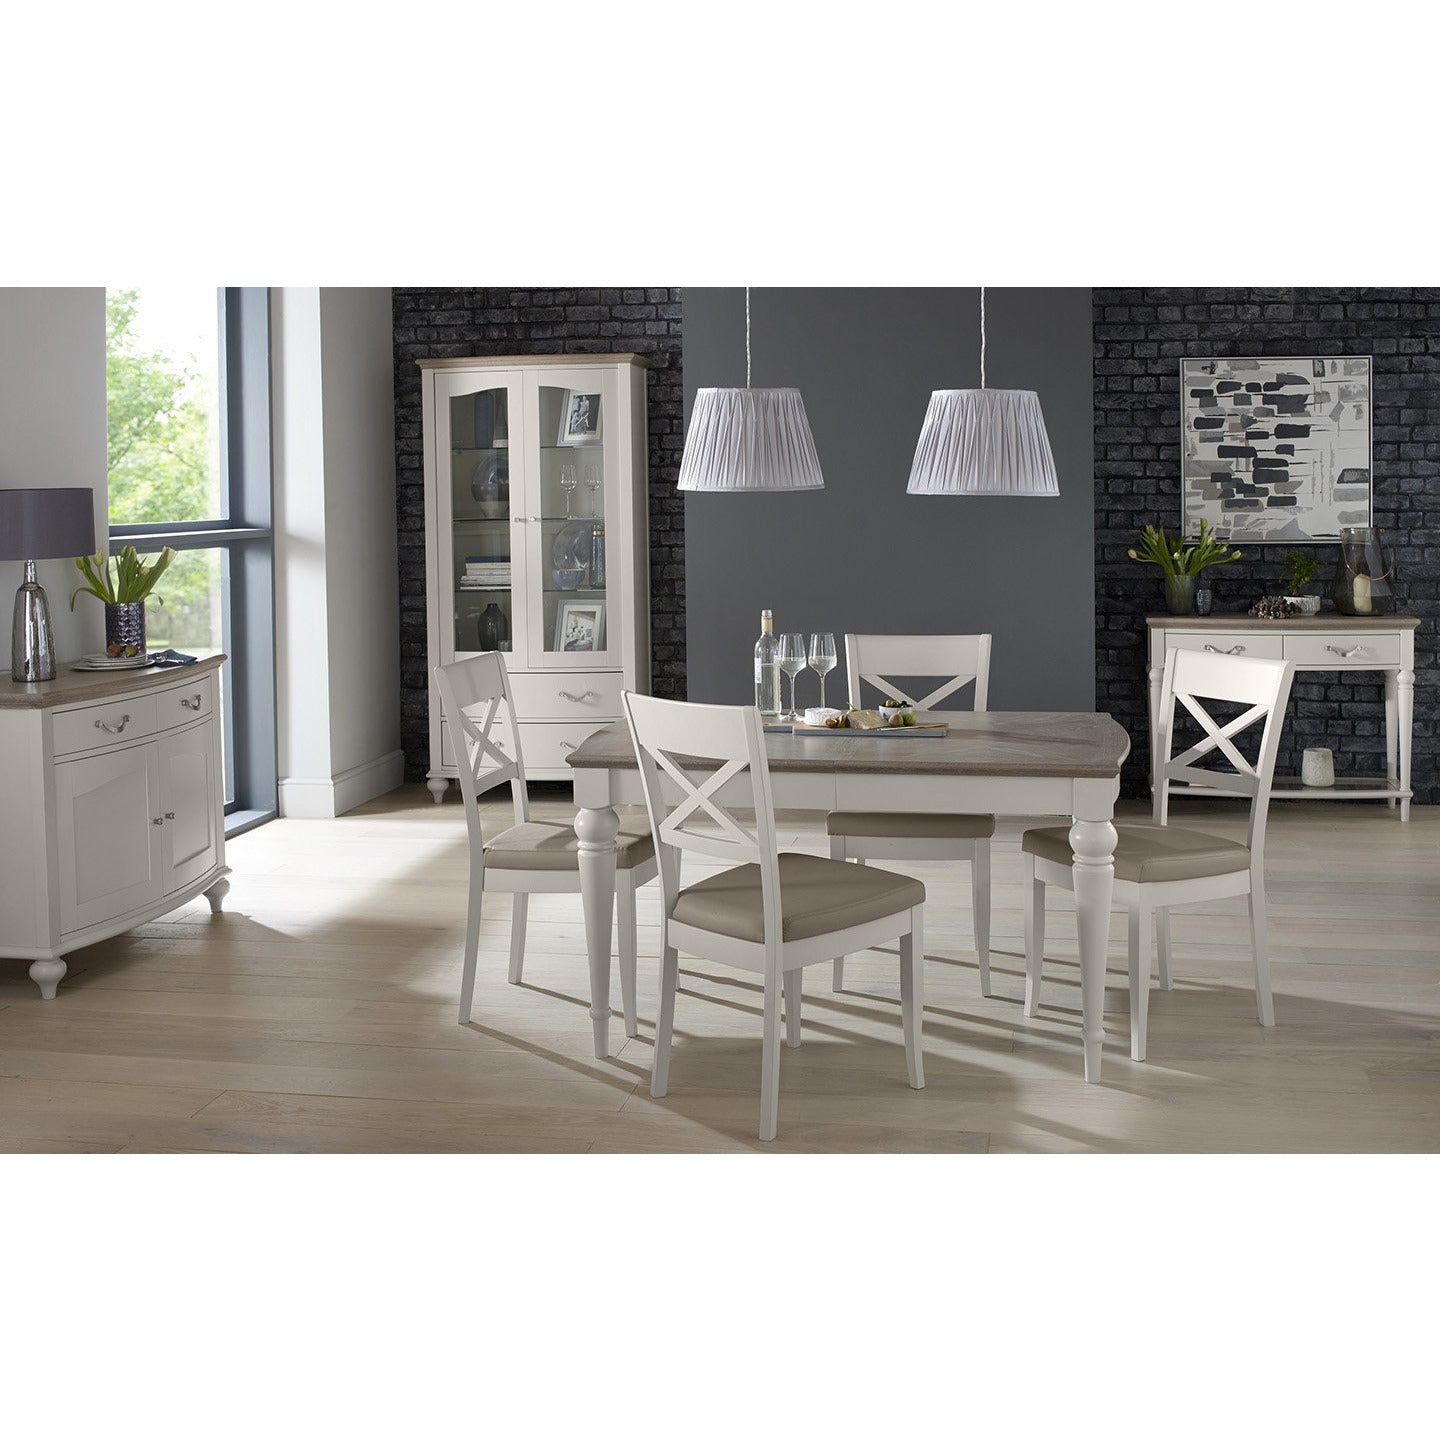 Montreux Medium Extending Dining Table - Soft Grey from Upstairs Downstairs Furniture in Lisburn, Monaghan and Enniskillen